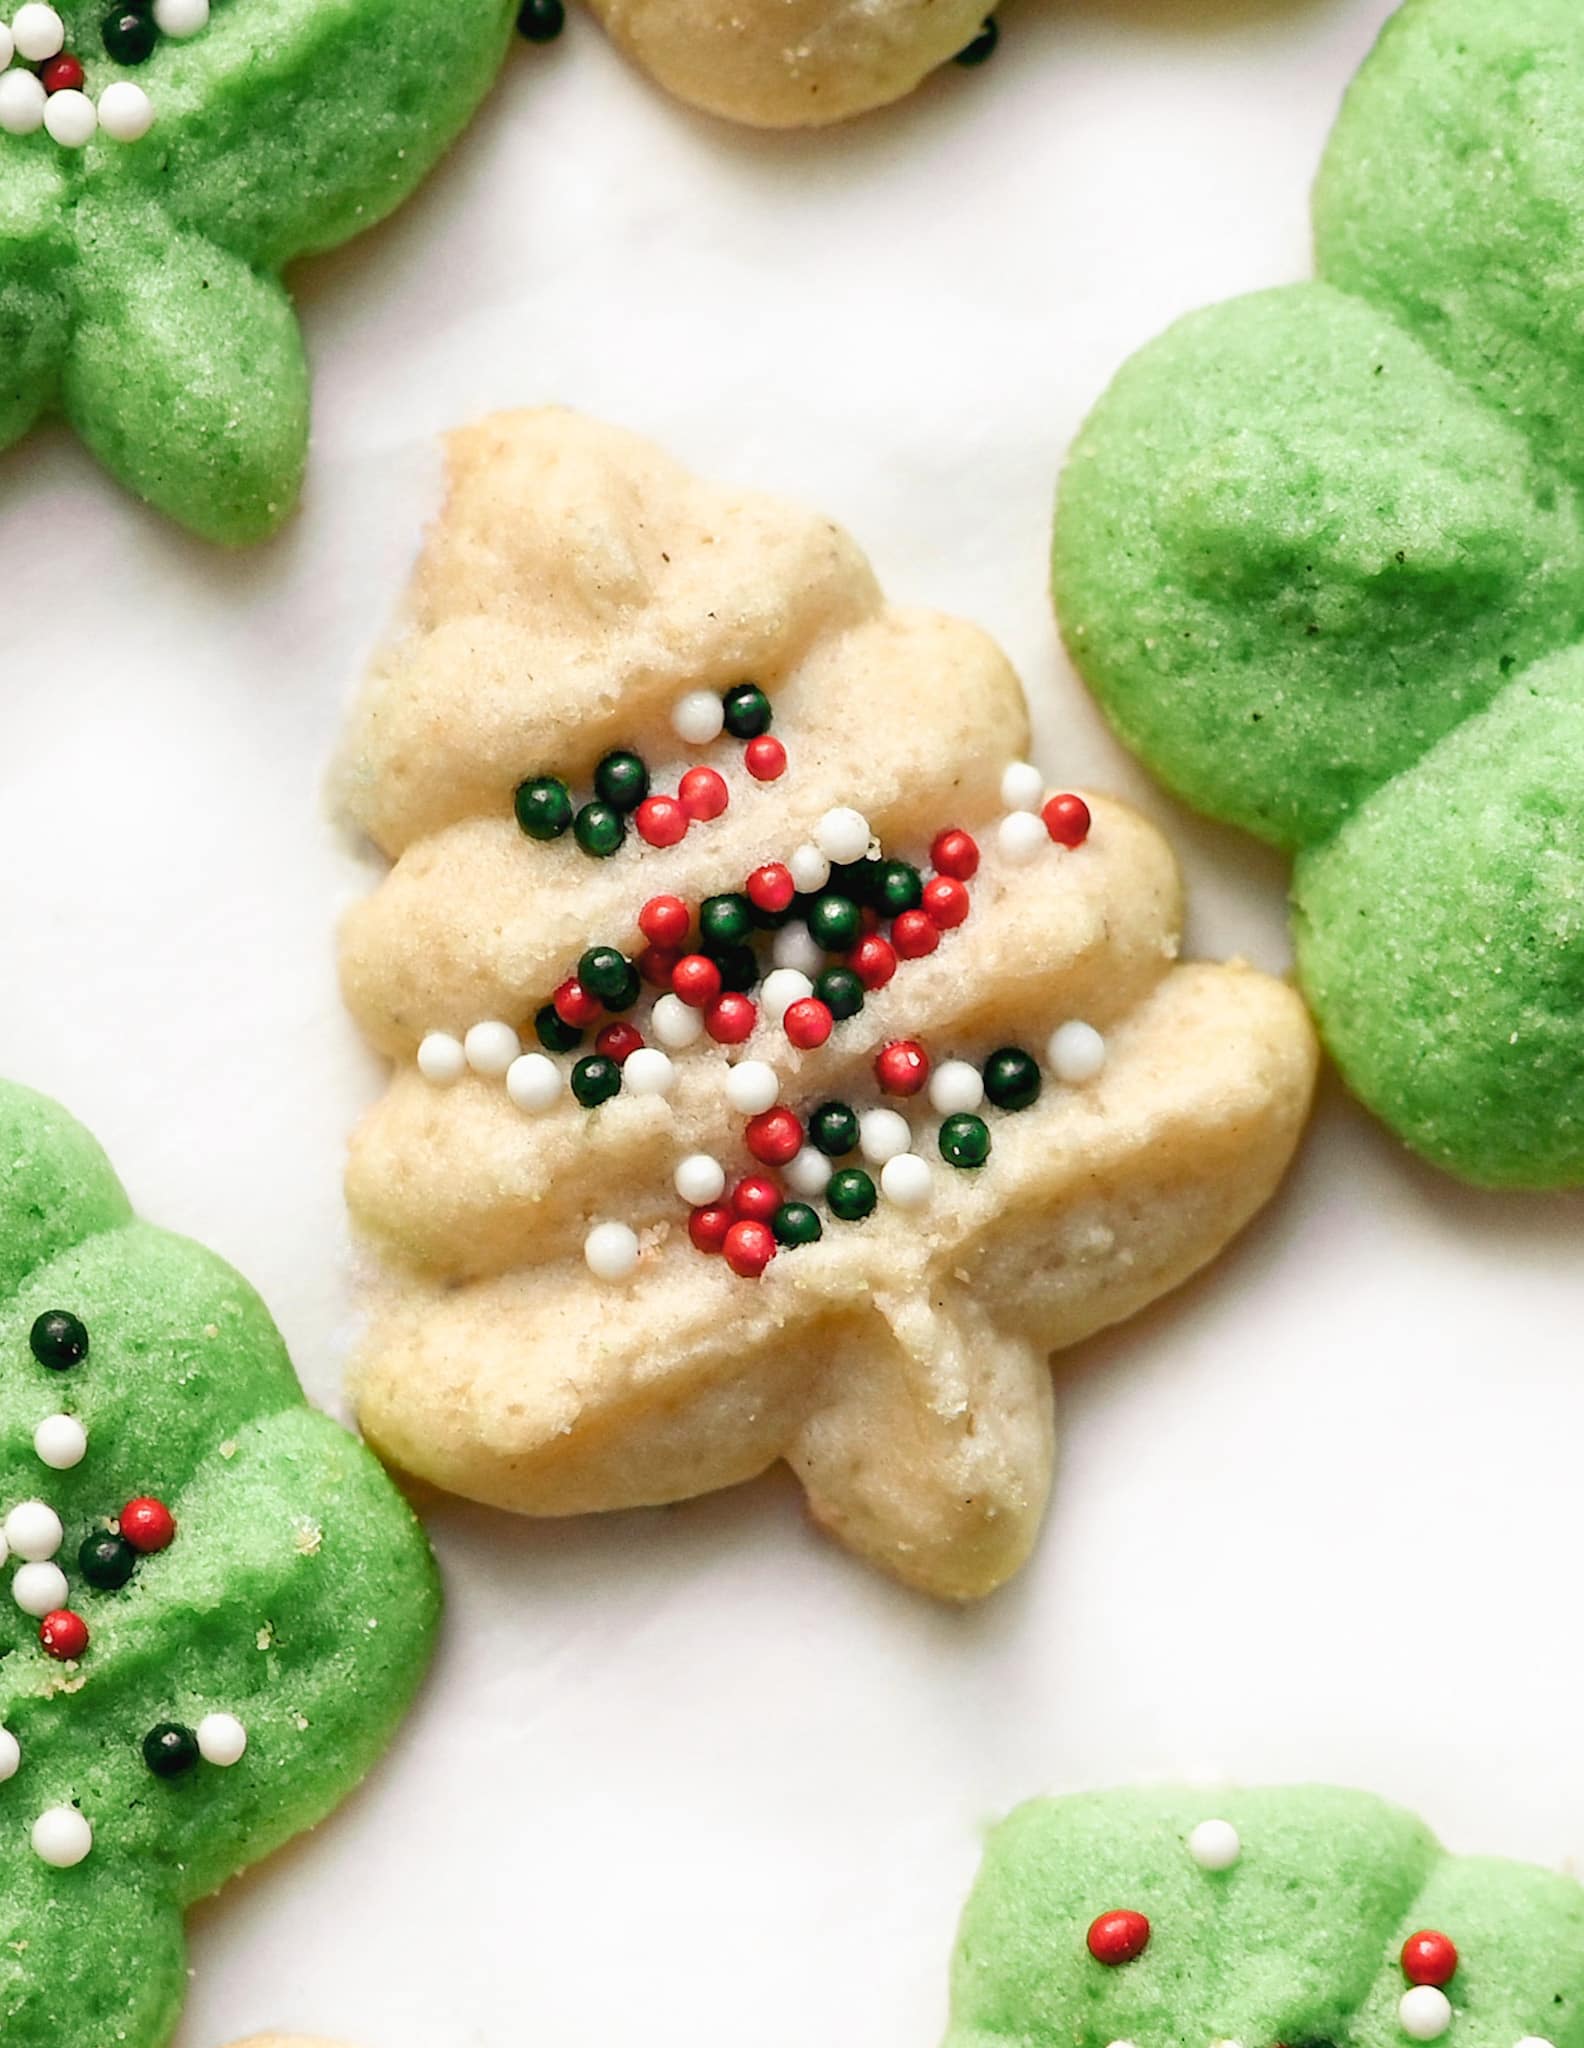 white gluten free spritz cookie with sprinkles. Surrounded by green spritz cookies.